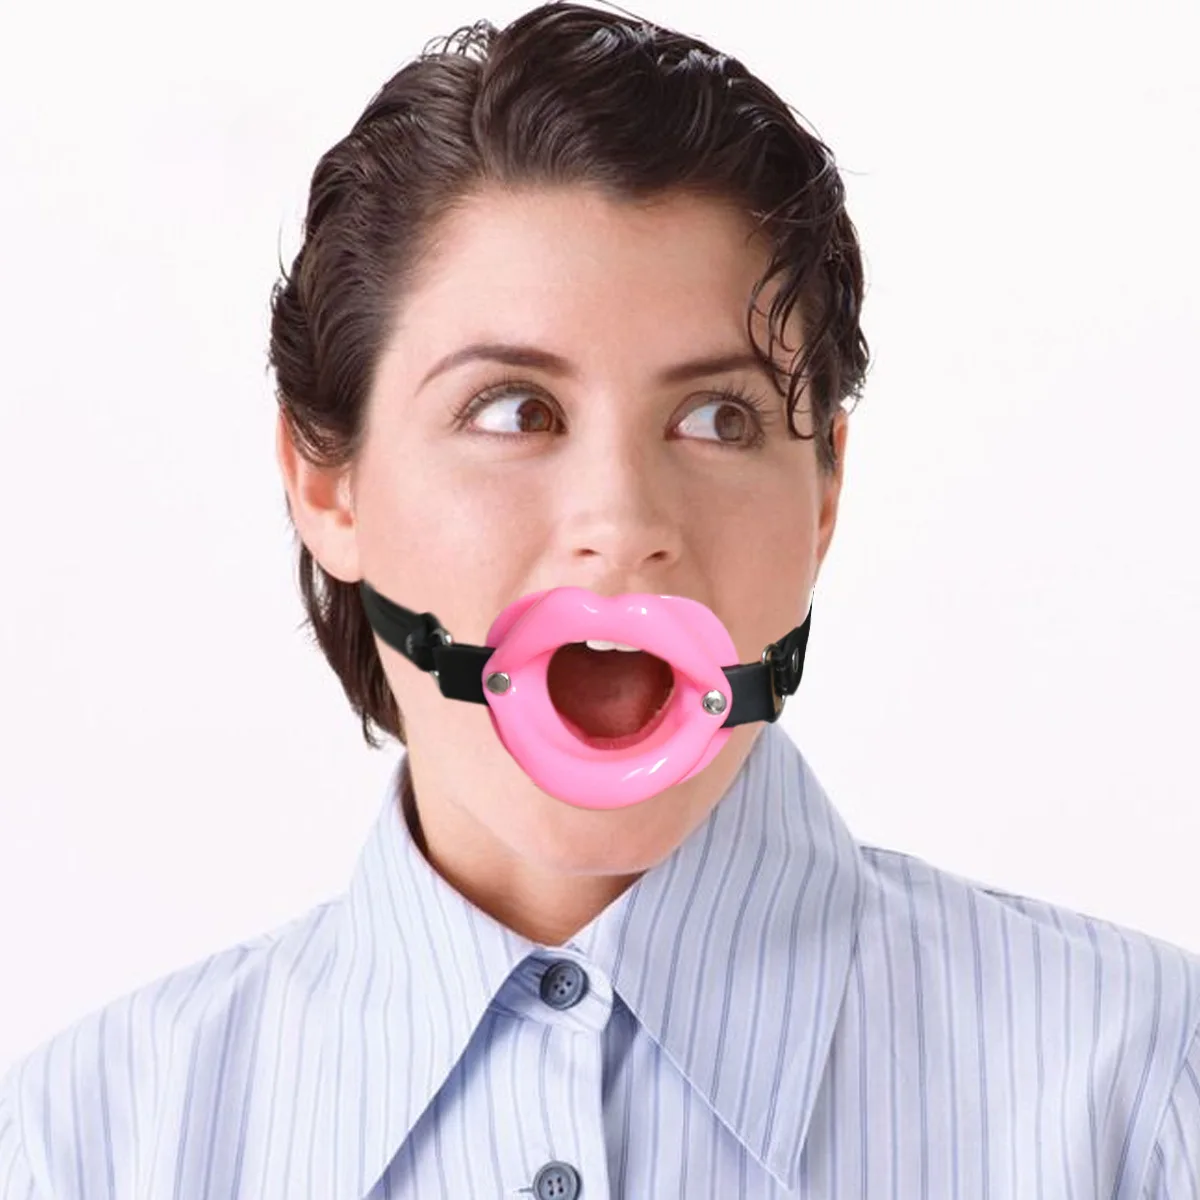 anal hook on an open mouth gag toy